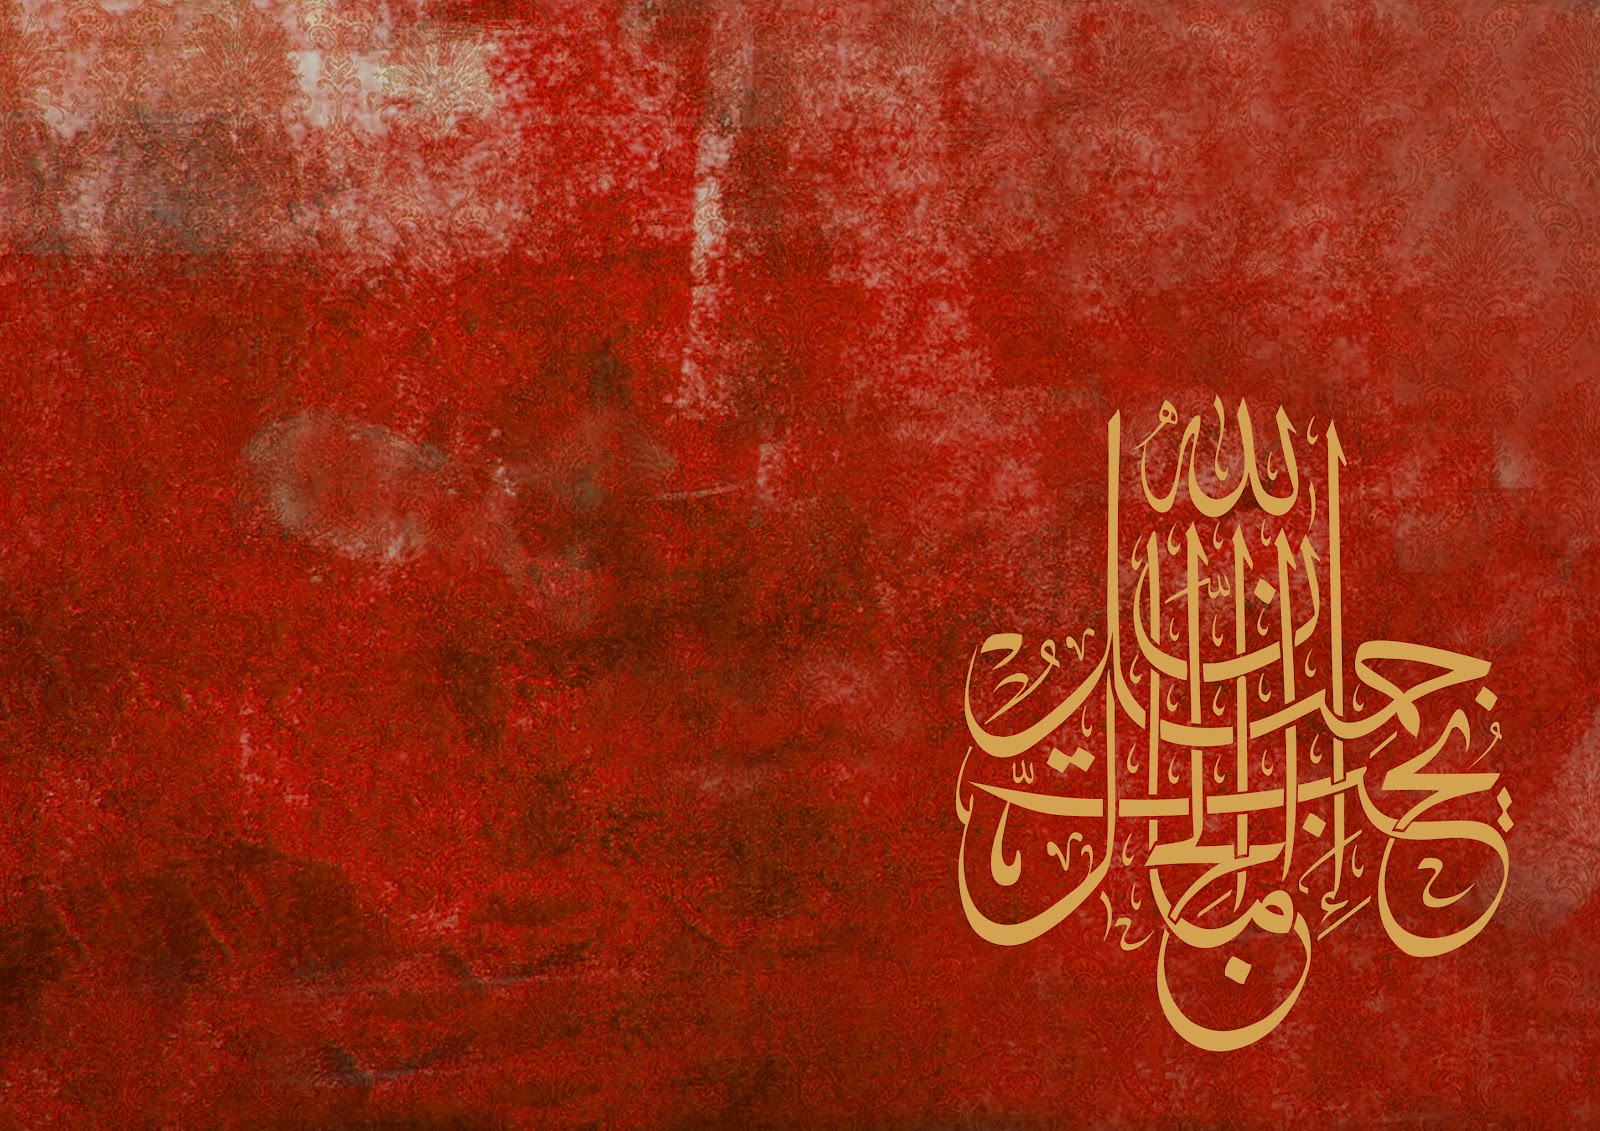 ISLAM THE PERFECT RELIGION Best Islamic Calligraphy Wallpapers Free